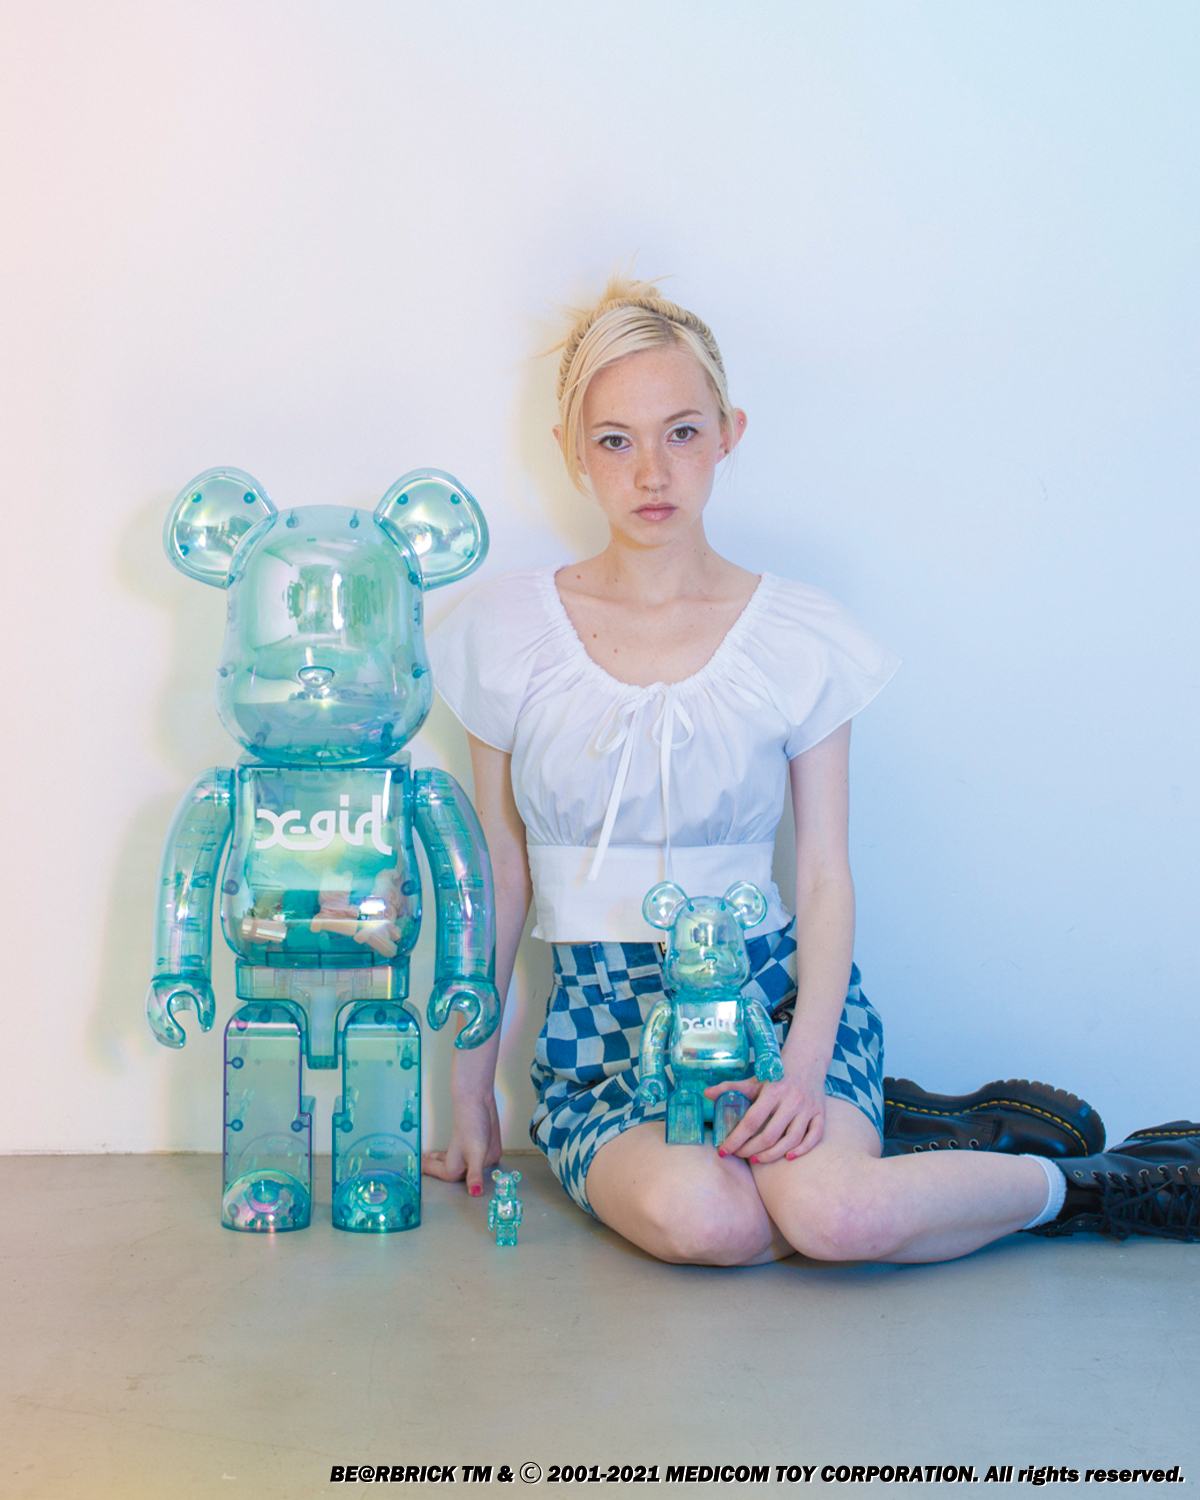 X-girl×Be@rbrick | NEWS | X-girl OFFICIAL SITE（X-girl官方网站）